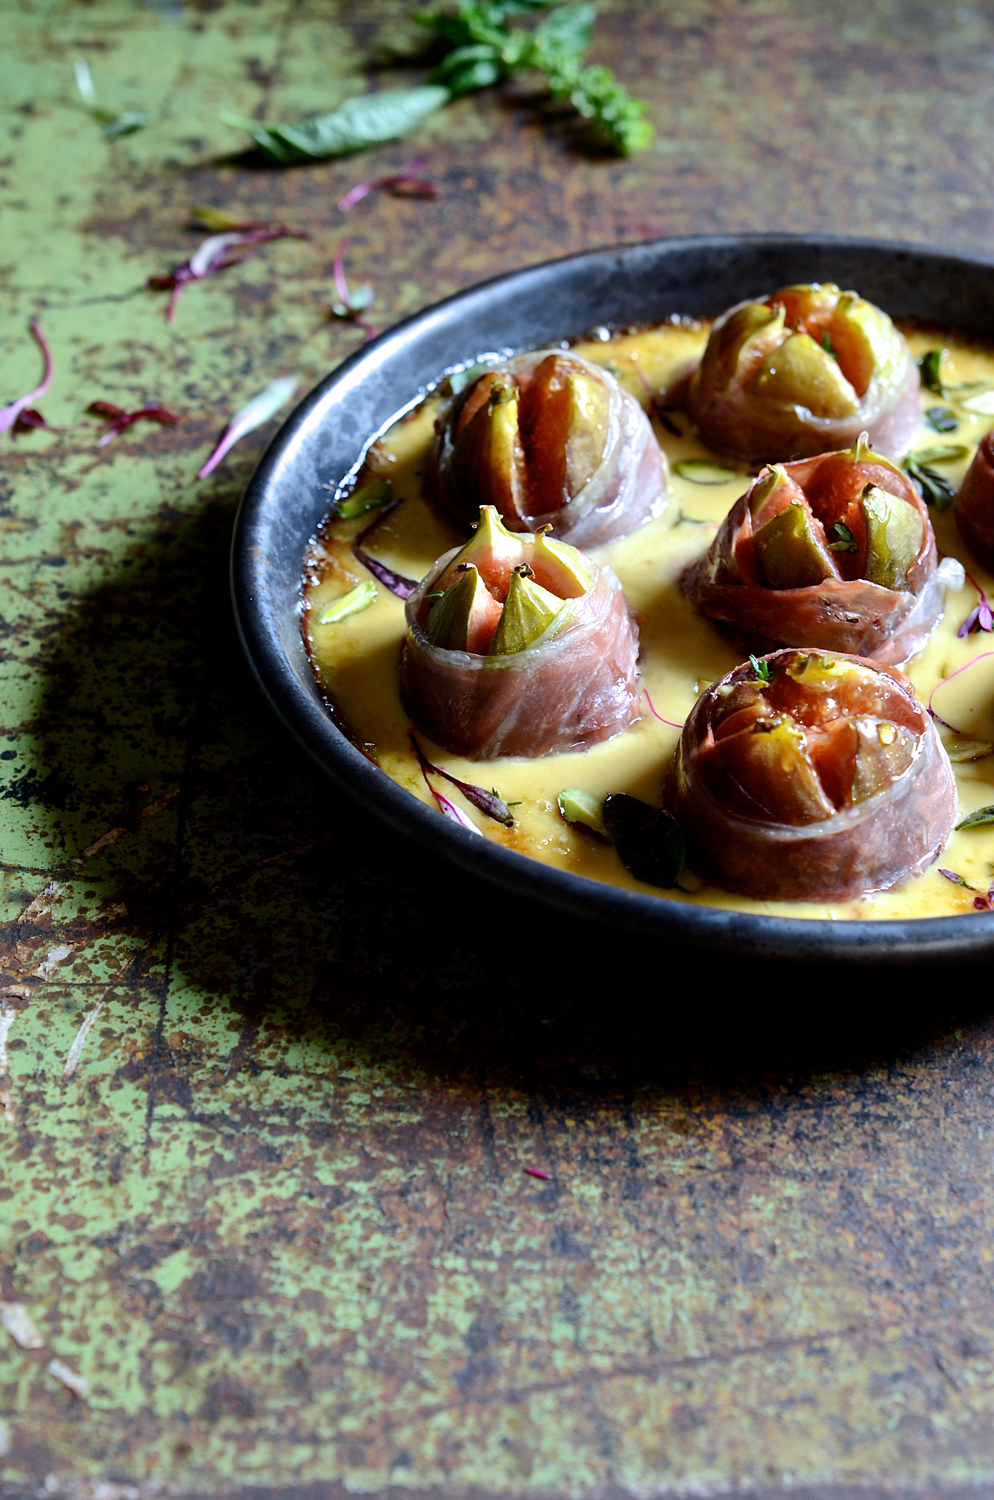 Grilled figs with gorgonzola cream